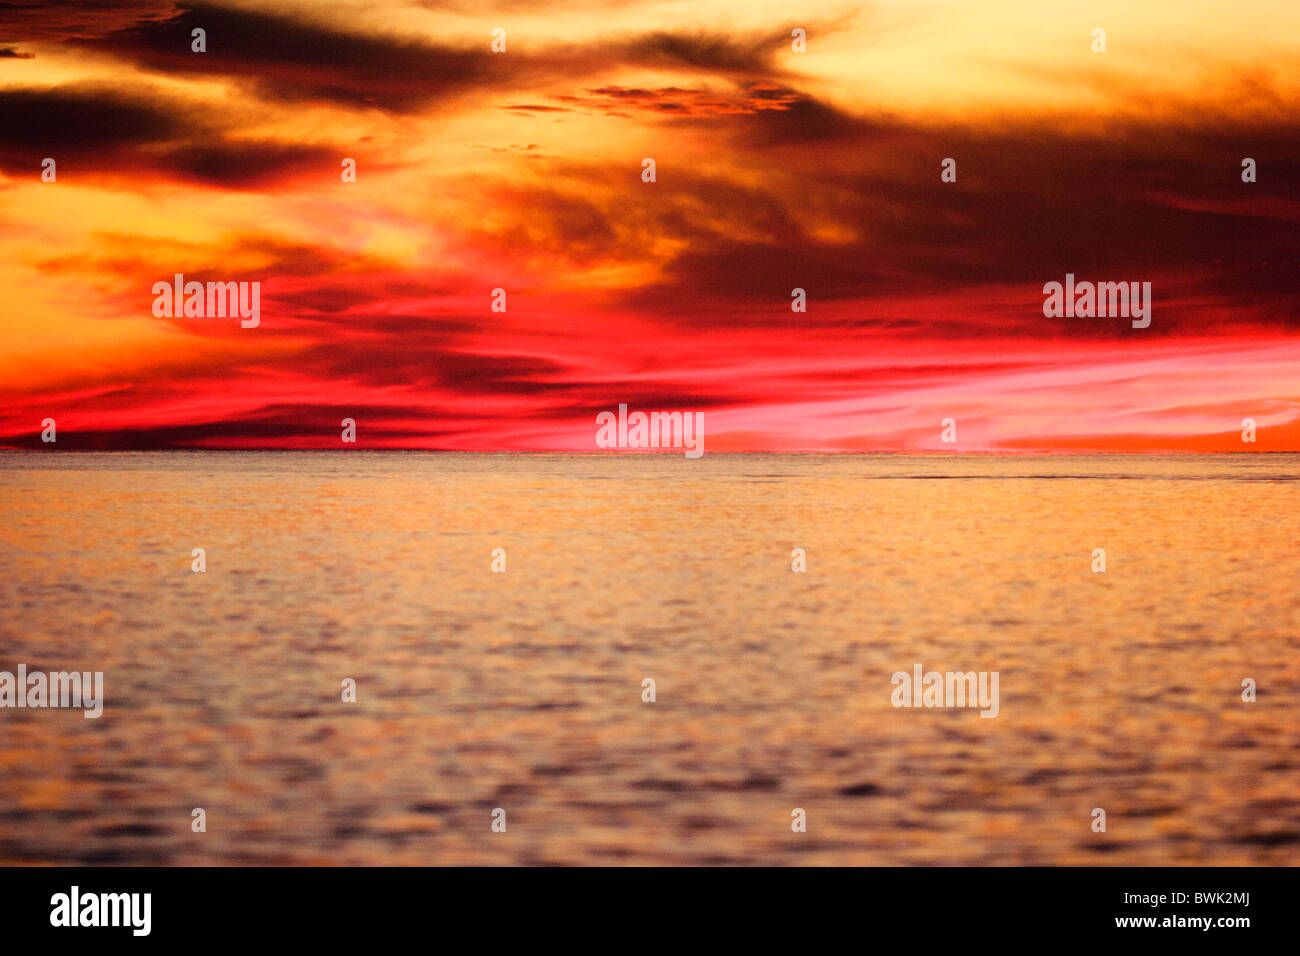 Dramatic sunset clouds over calm water. Stock Photo